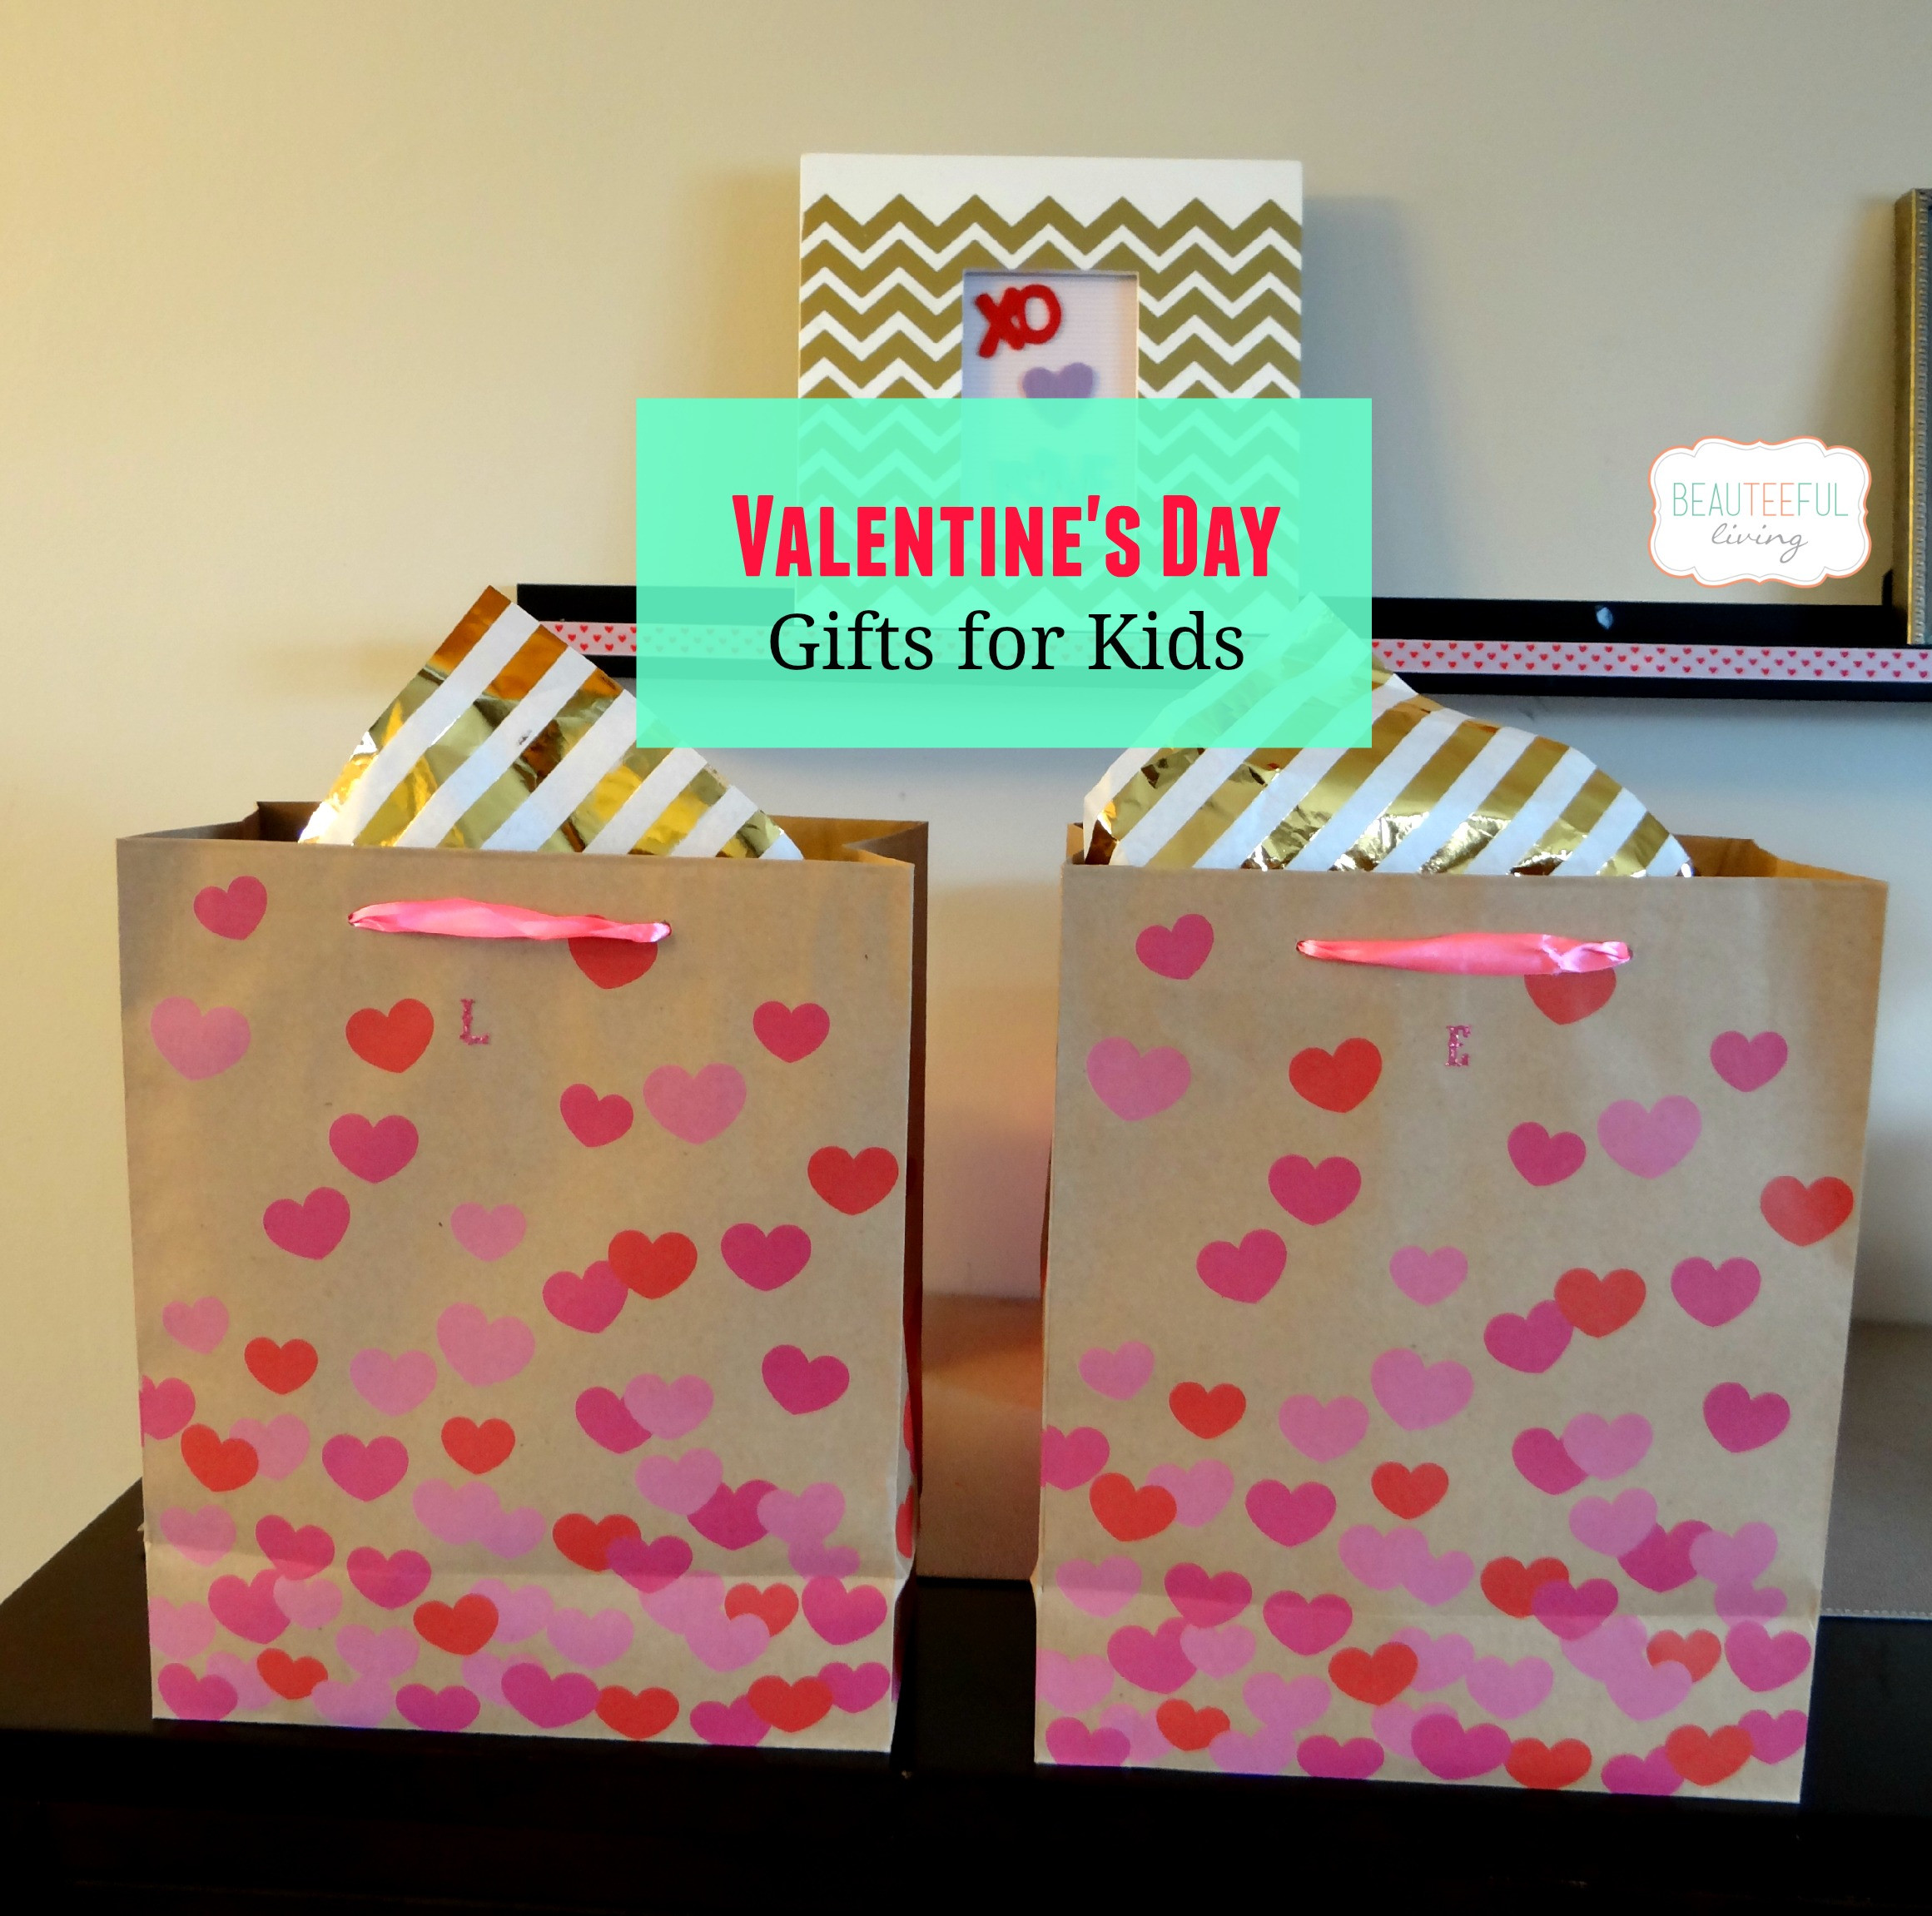 Valentine Gift Ideas For Kid
 Valentine s Day Gifts for Kids BEAUTEEFUL Living